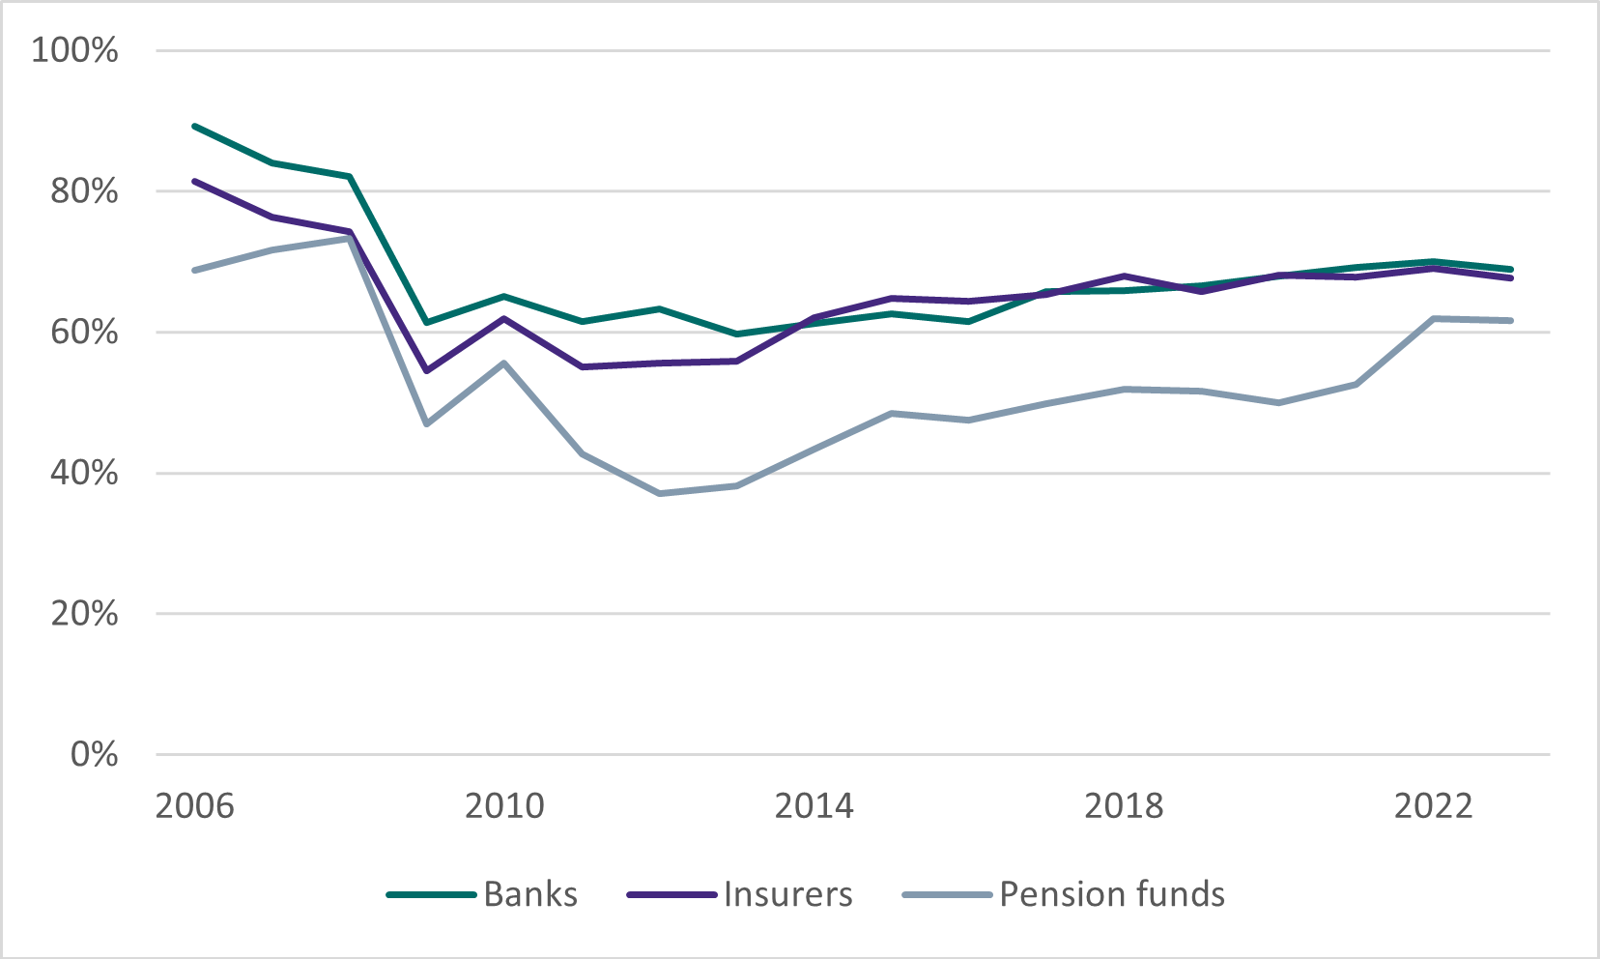 Figure 2: Public trust in the financial health of banks, insurers and pension funds